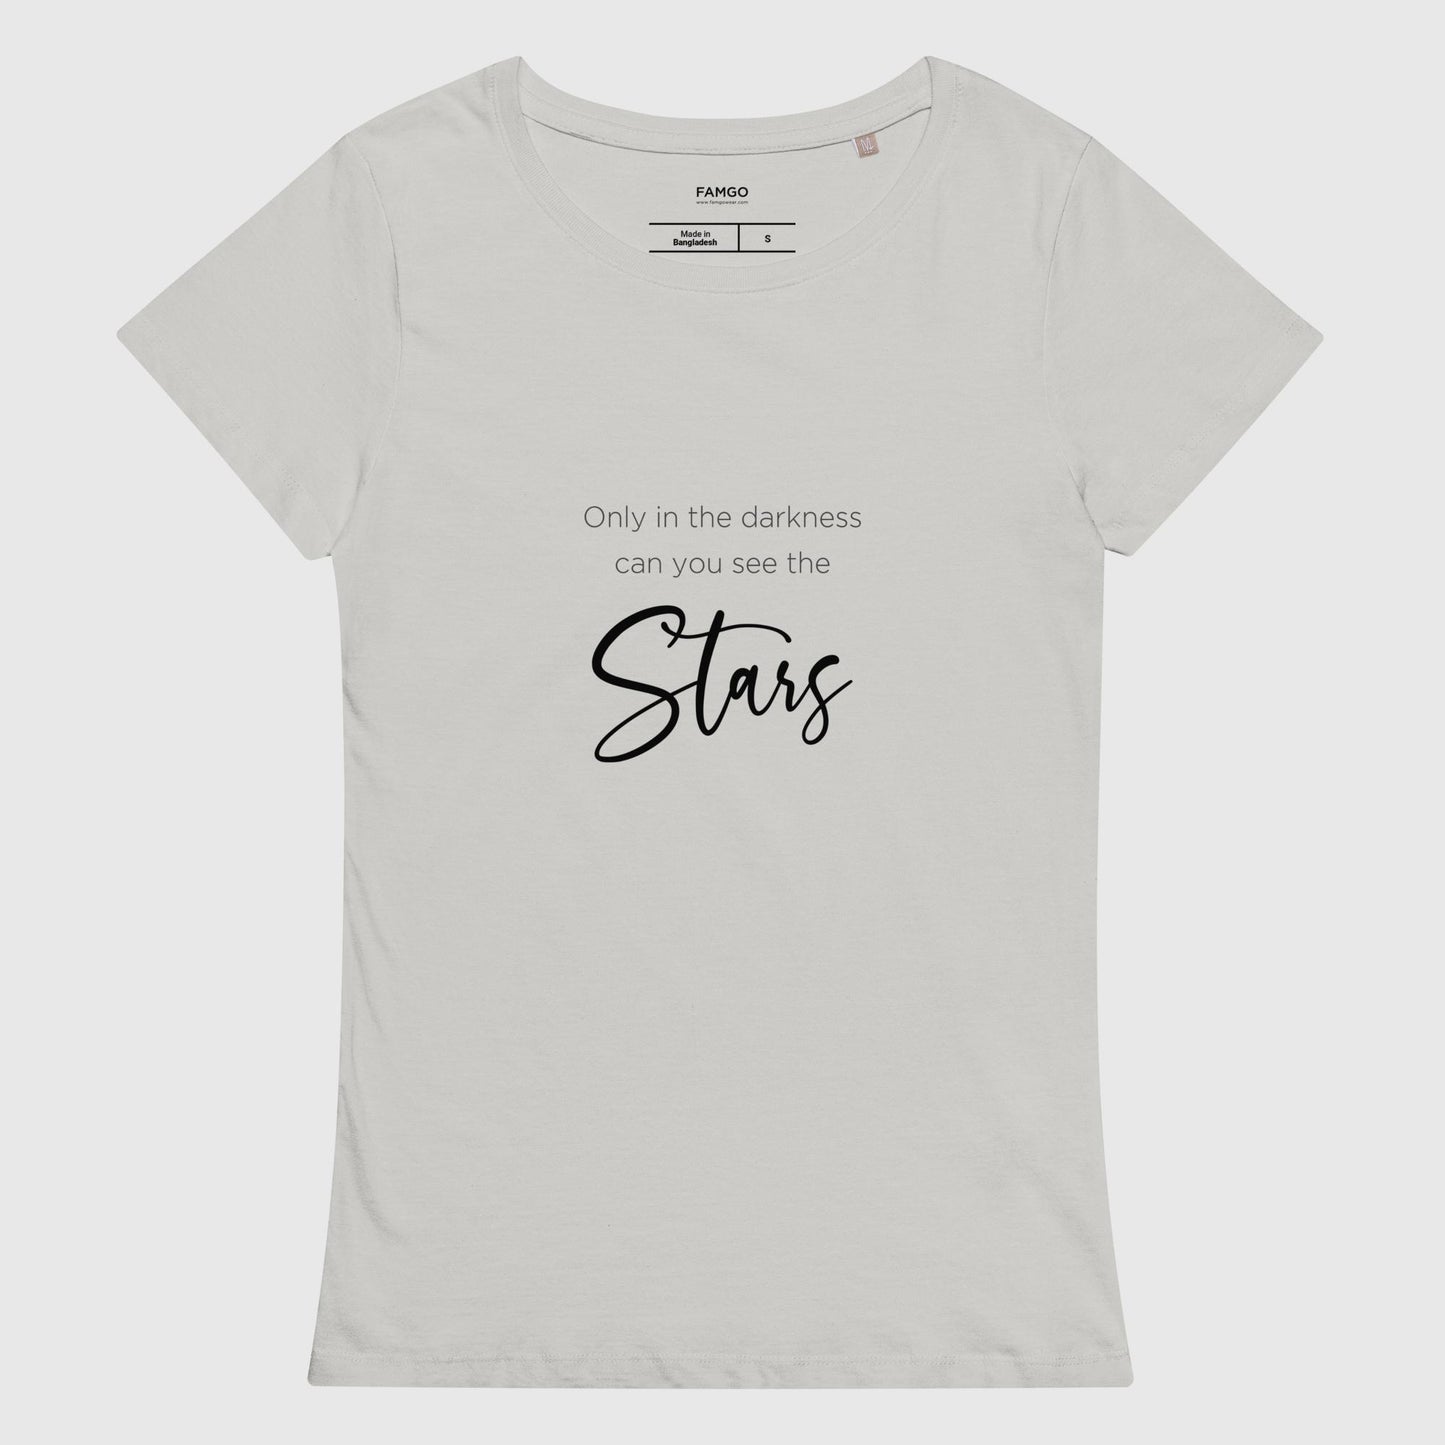 Women's pure gray organic cotton t-shirt with Dr. Martin Luther King Jr.'s inspirational quote, "Only In The Darkness Can You See The Stars."